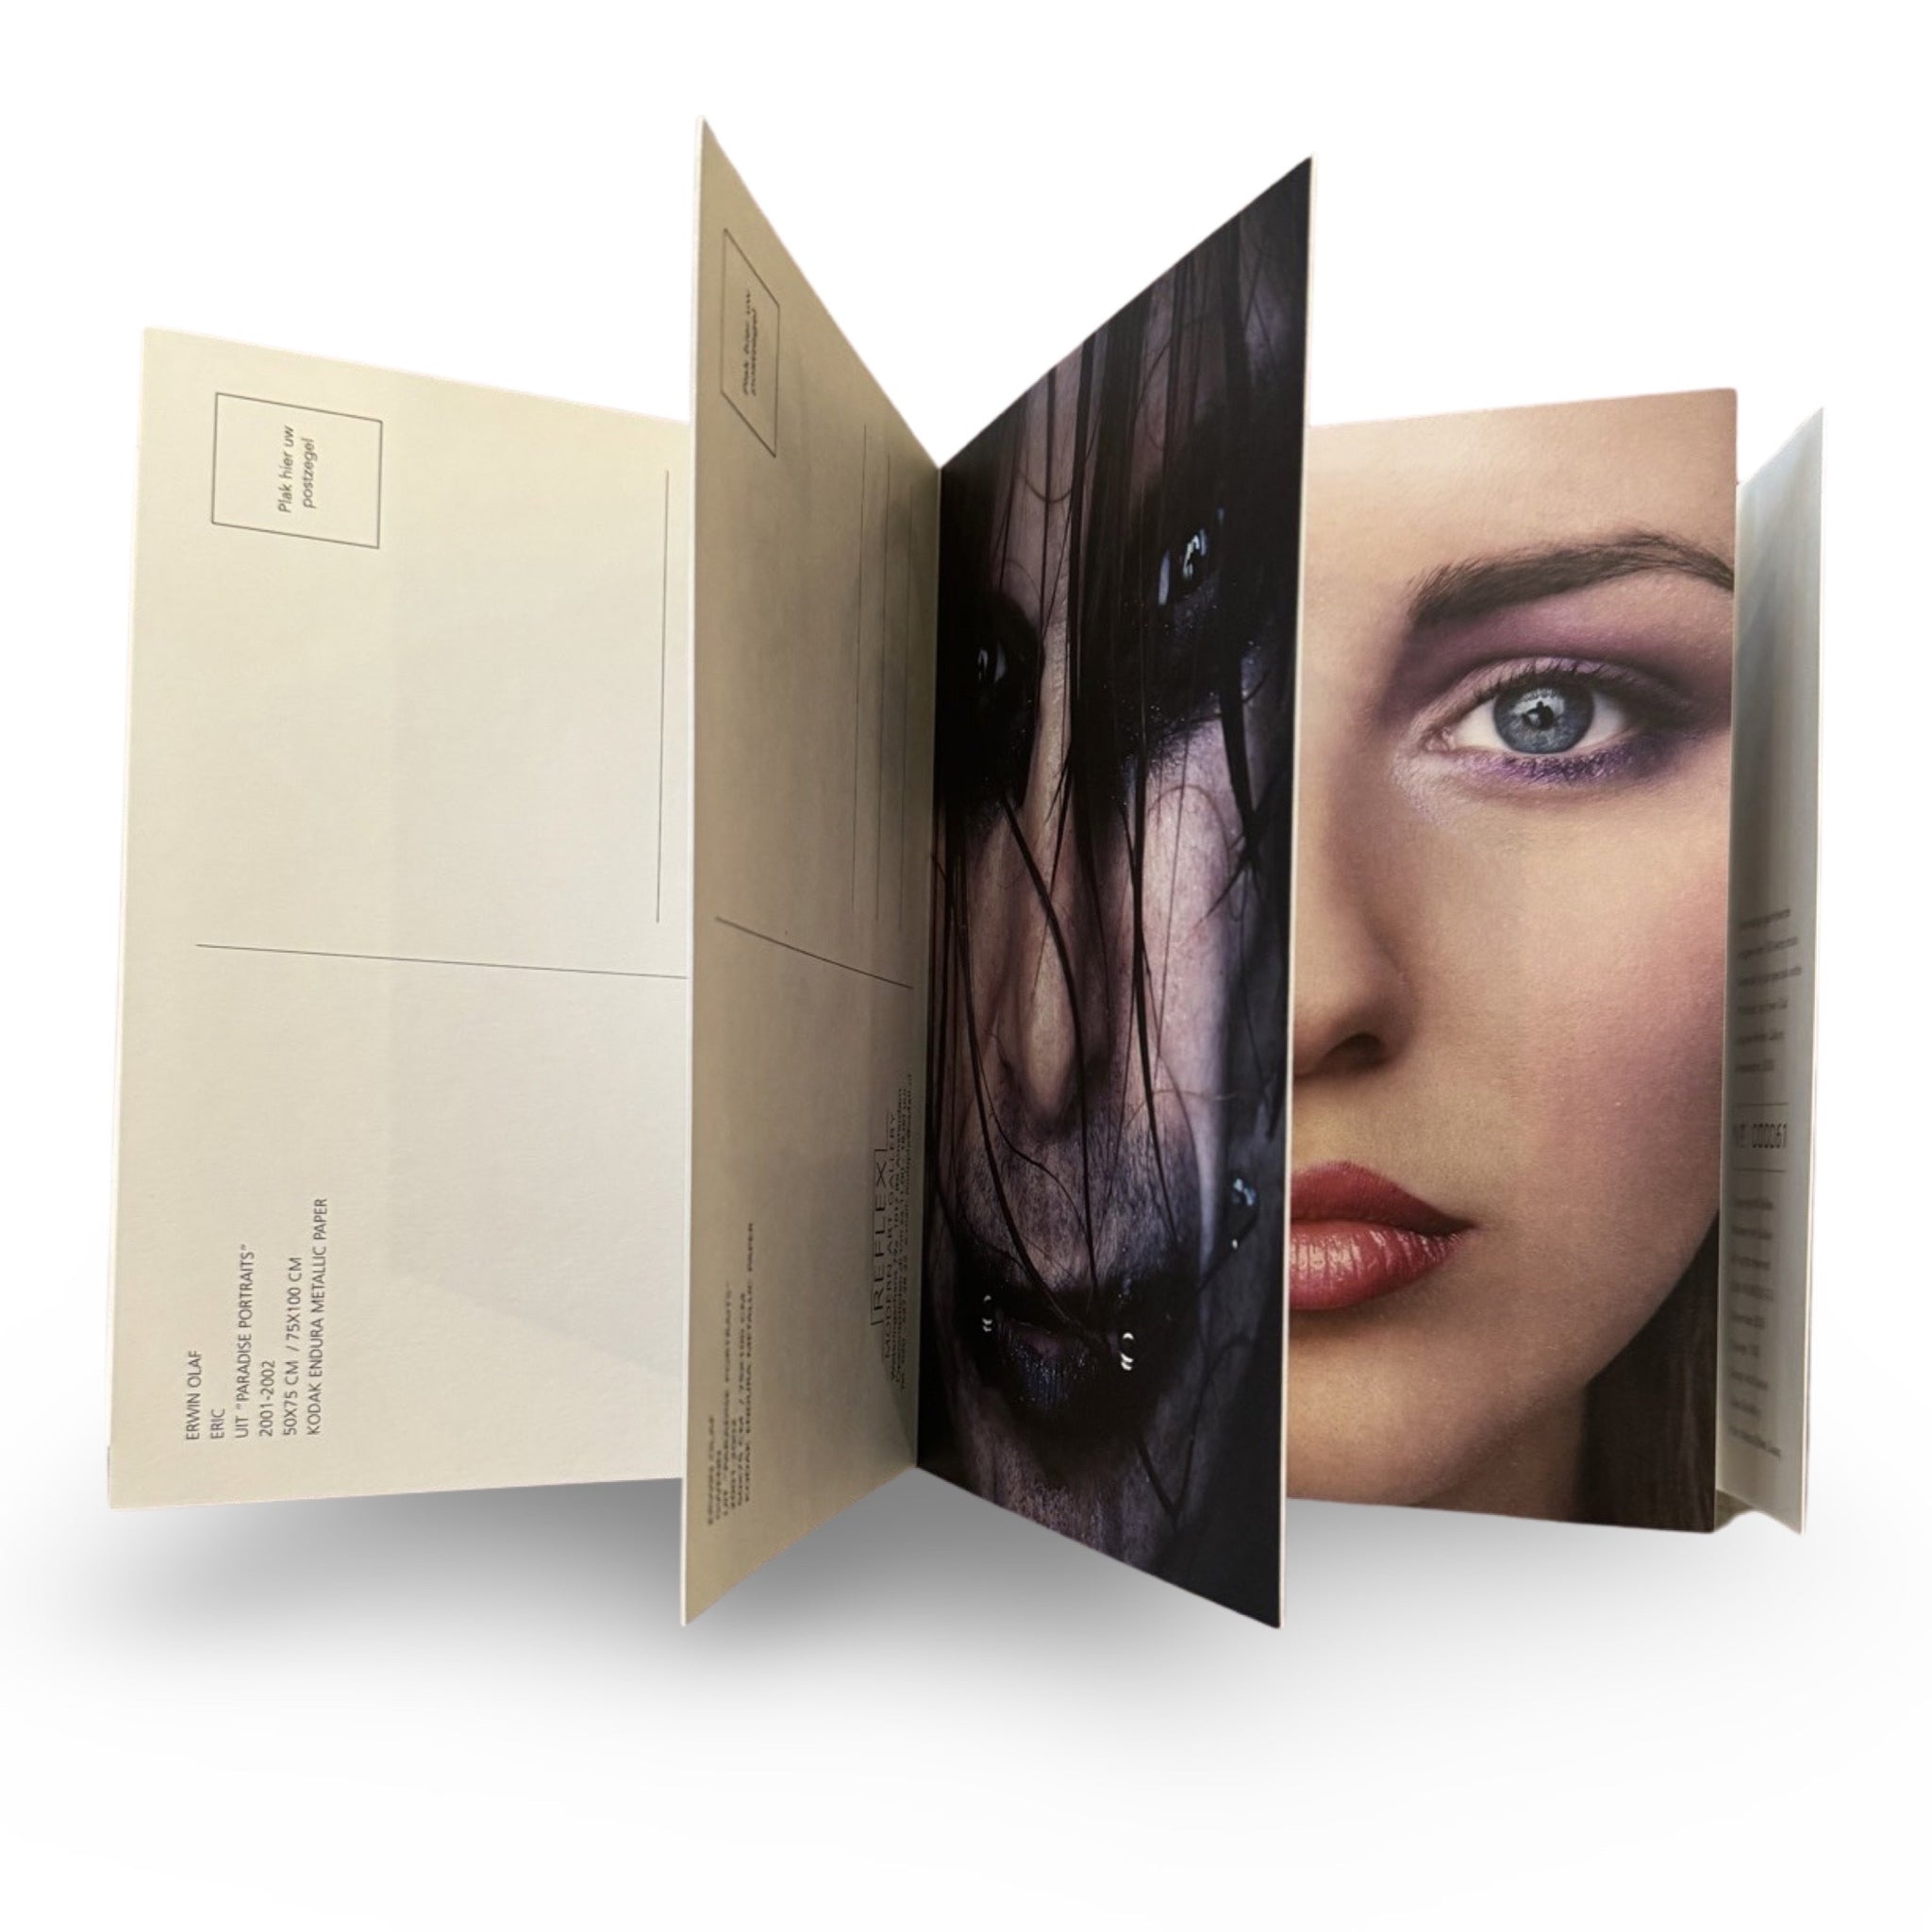 Erwin Olaf - Paradise Portraits, Roy | complimentary Paradise Portraits collectors book included